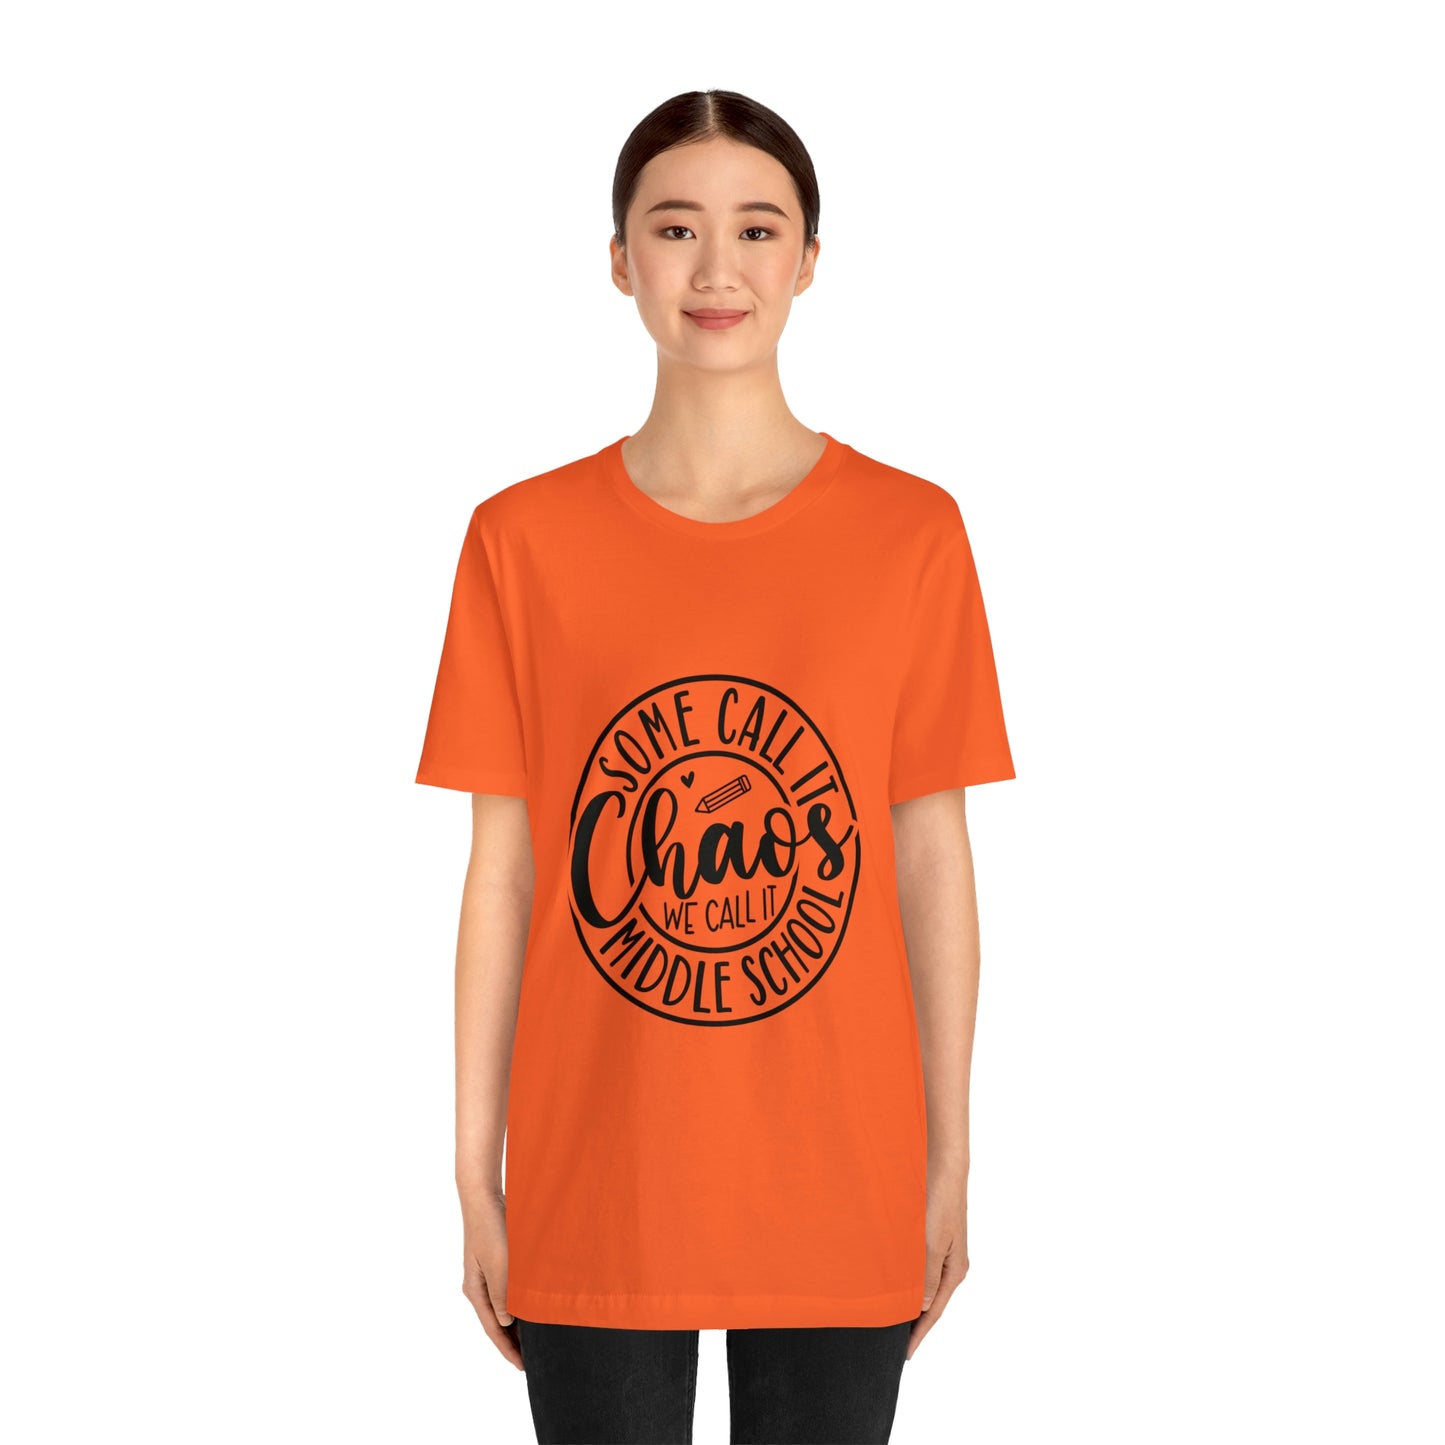 "Some call it Chaos, We call it middle school " Unisex Jersey Short Sleeve Tee